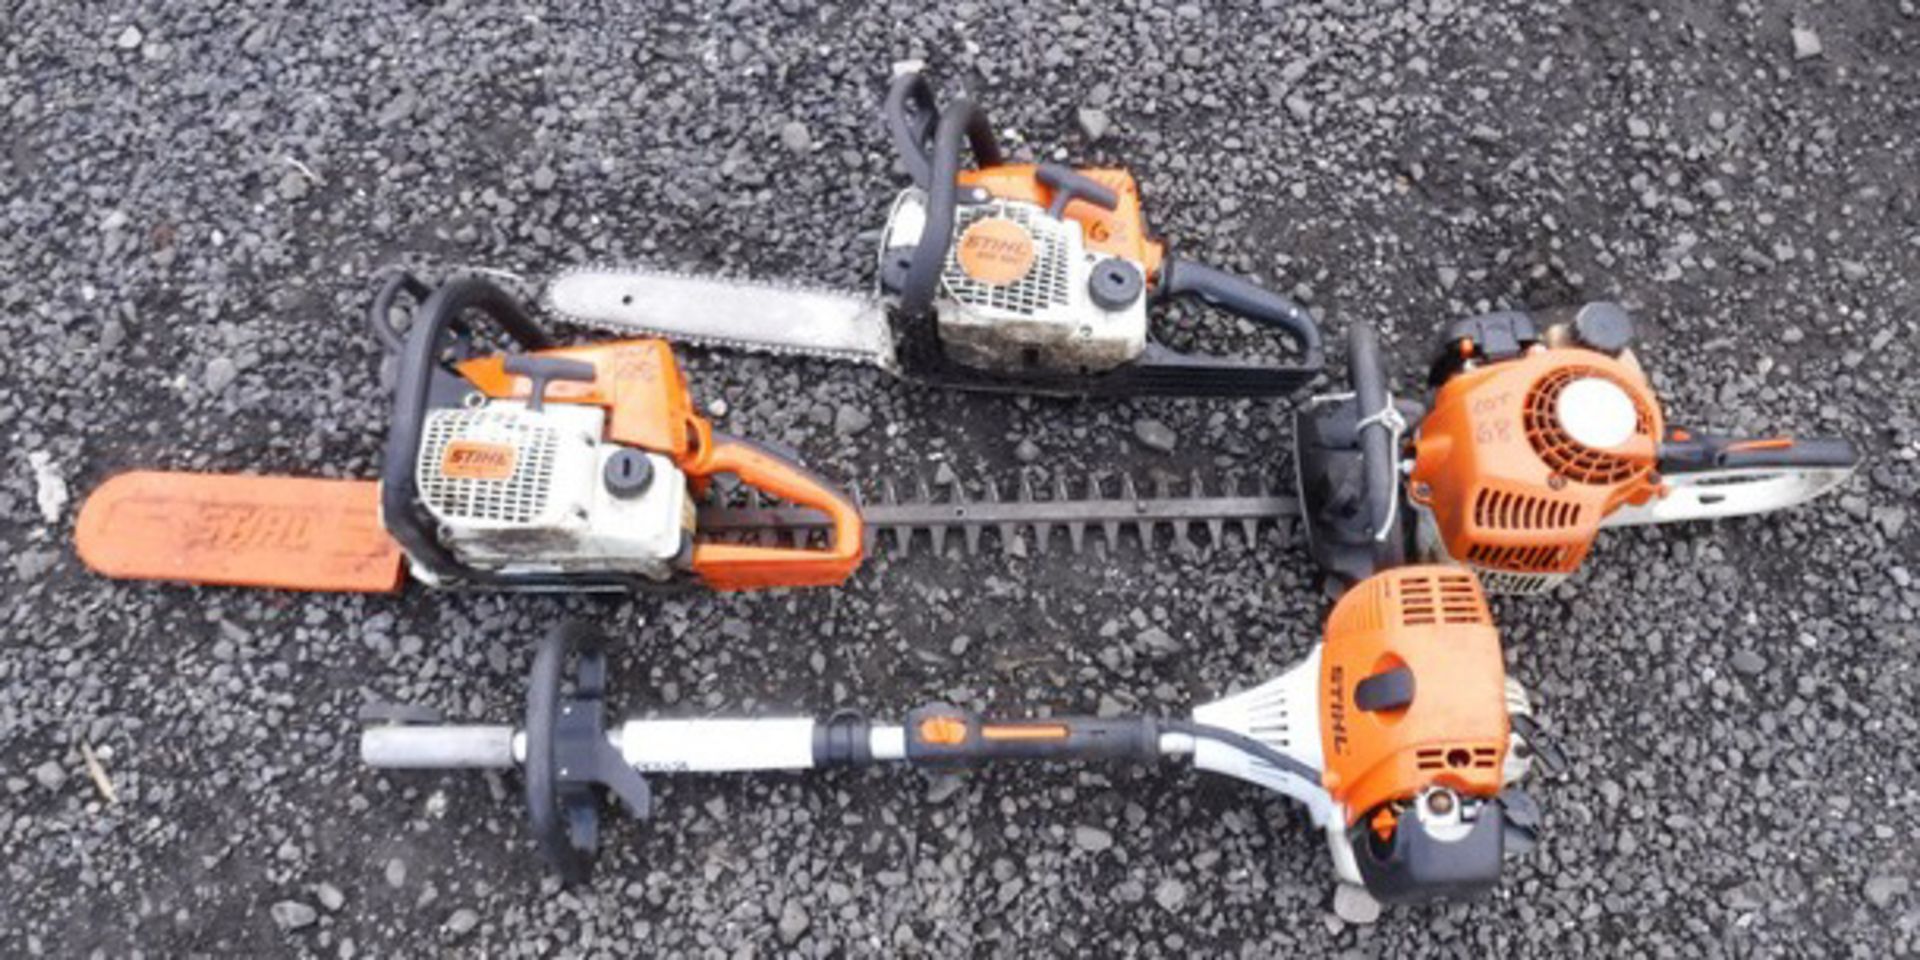 STIHL POWER UNIT, 2 STIHL CHAINSAWS & 1 STIHL HEDGE TRIMMER, FOR SPARES OR REPAIRS